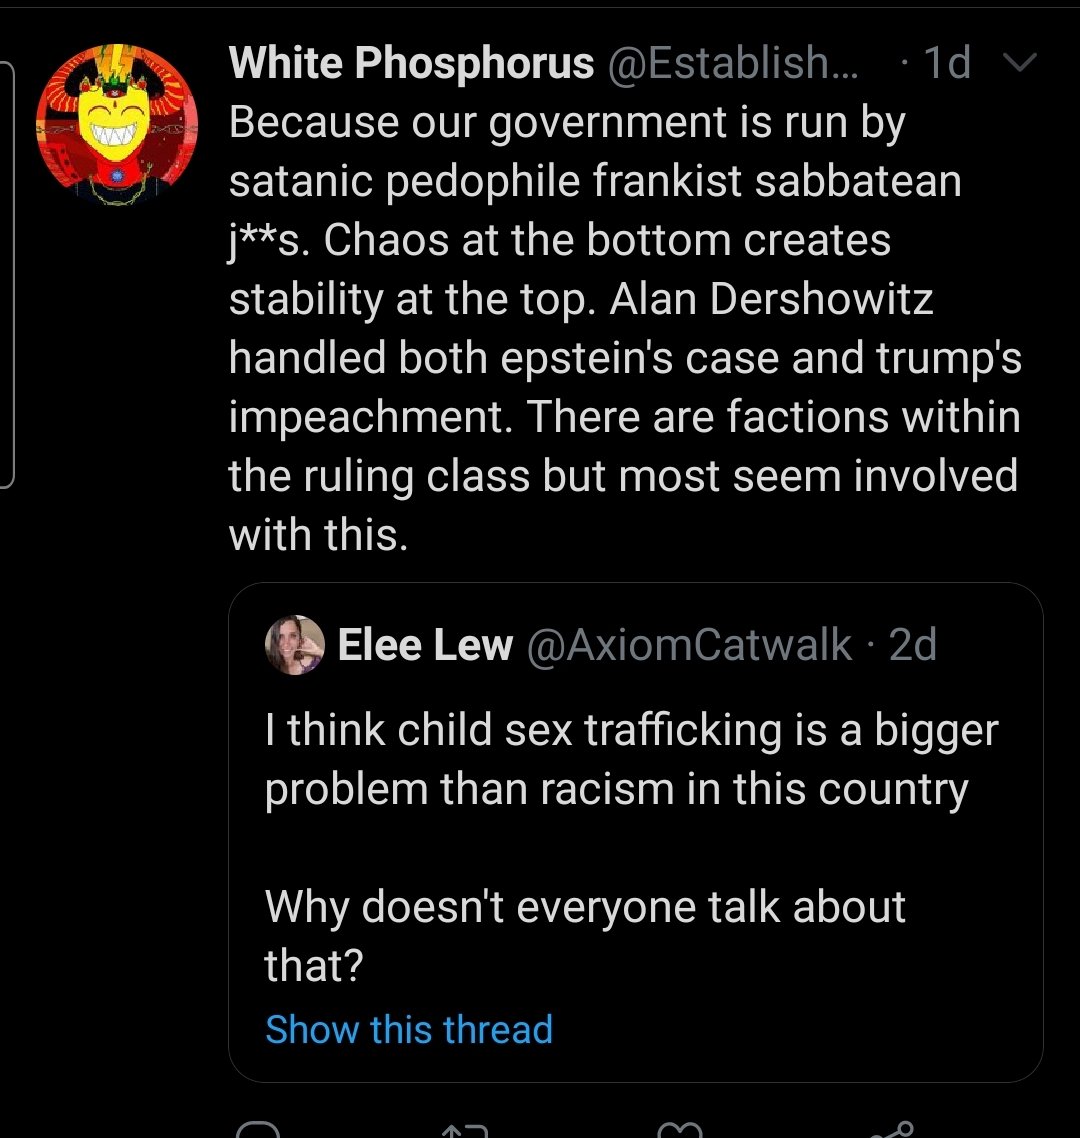 As with a lot of pro Trump and pro Tommy Robinson type accounts, even when talking about BLM they still fit in the idea that there is some grand pedophile conspiracy going on. Dont trust anyone except us who know the truth, fostering extremism uses similar methods to grooming22/